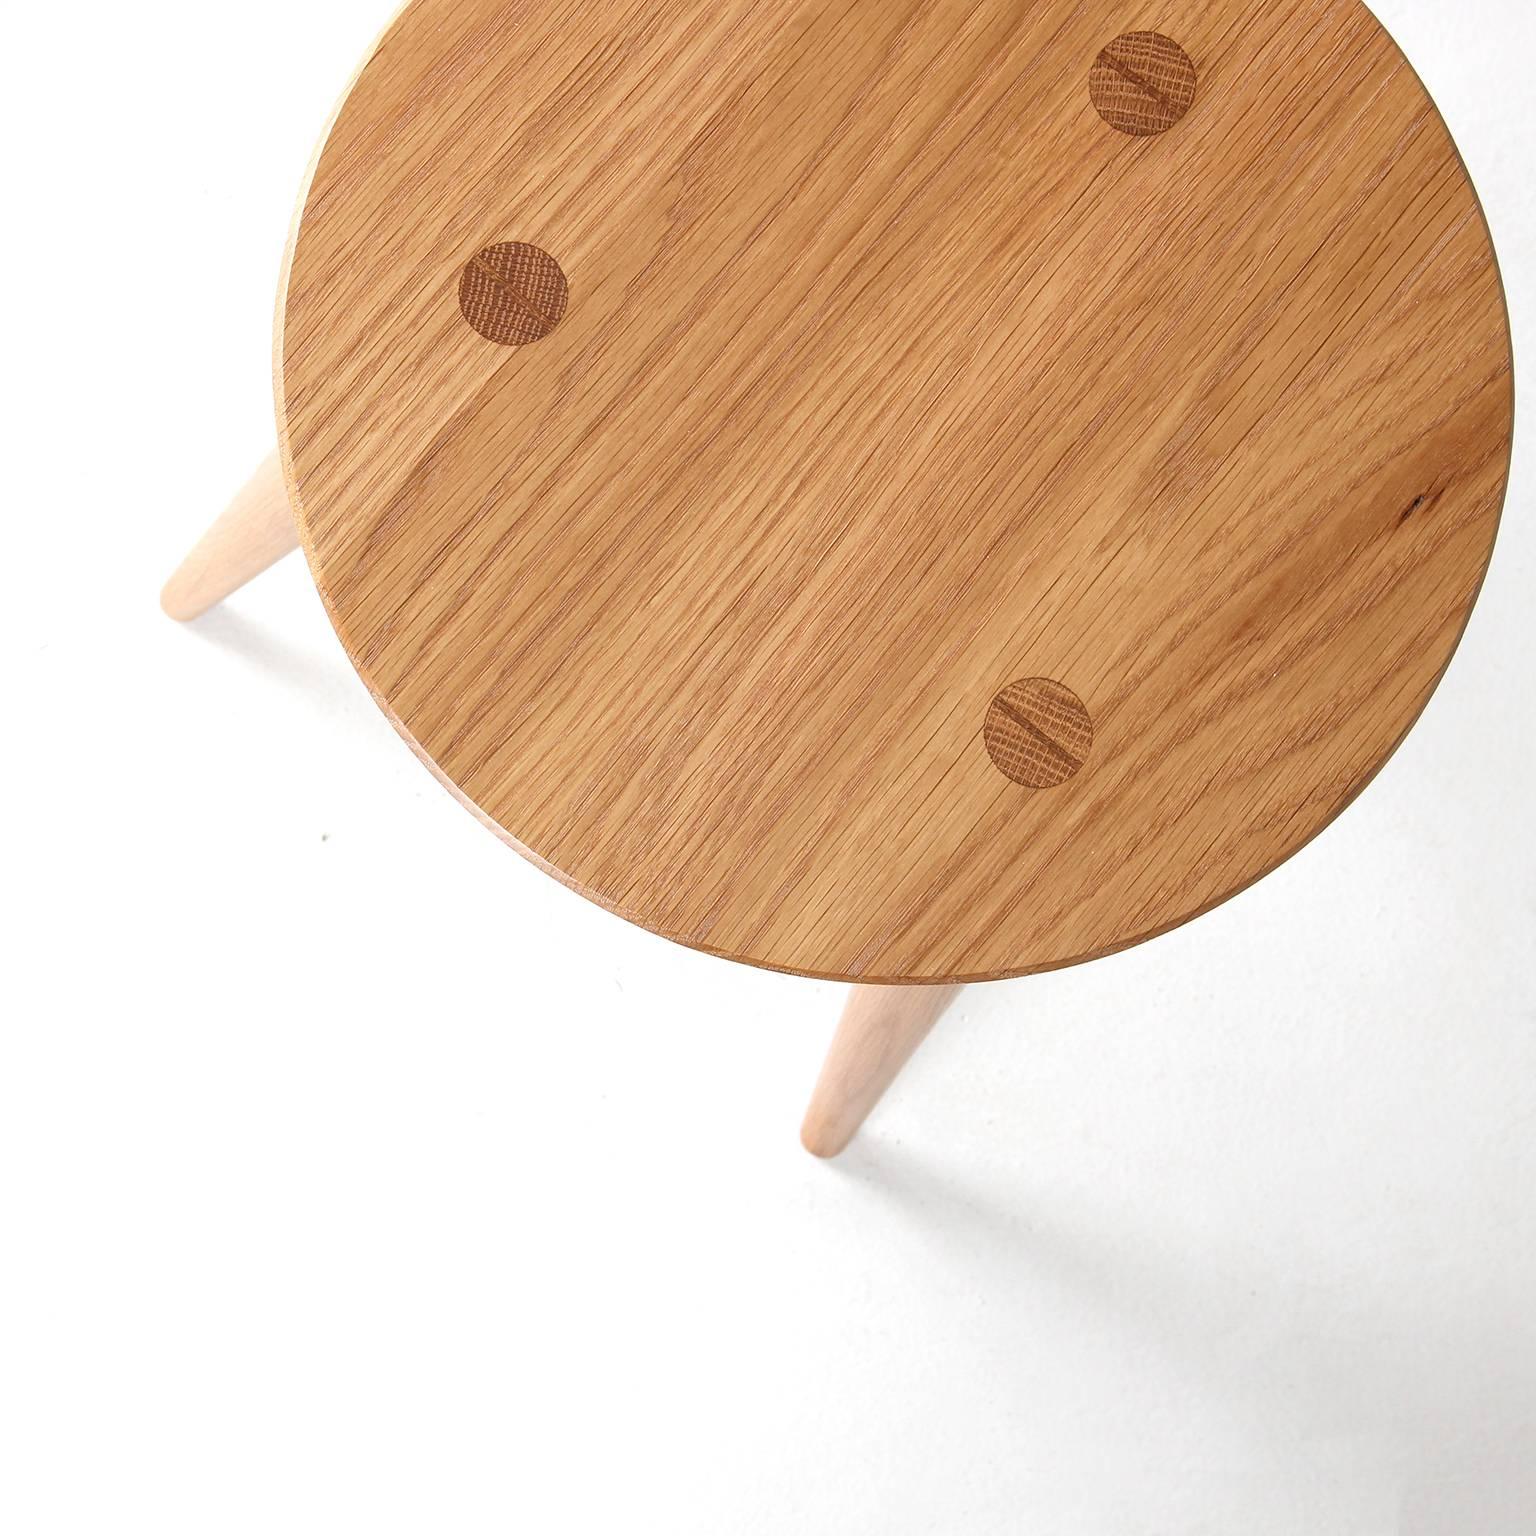 Mid-Century Modern Coventry Stool with Windsor Joinery in Walnut by Studio Dunn, Made to Order